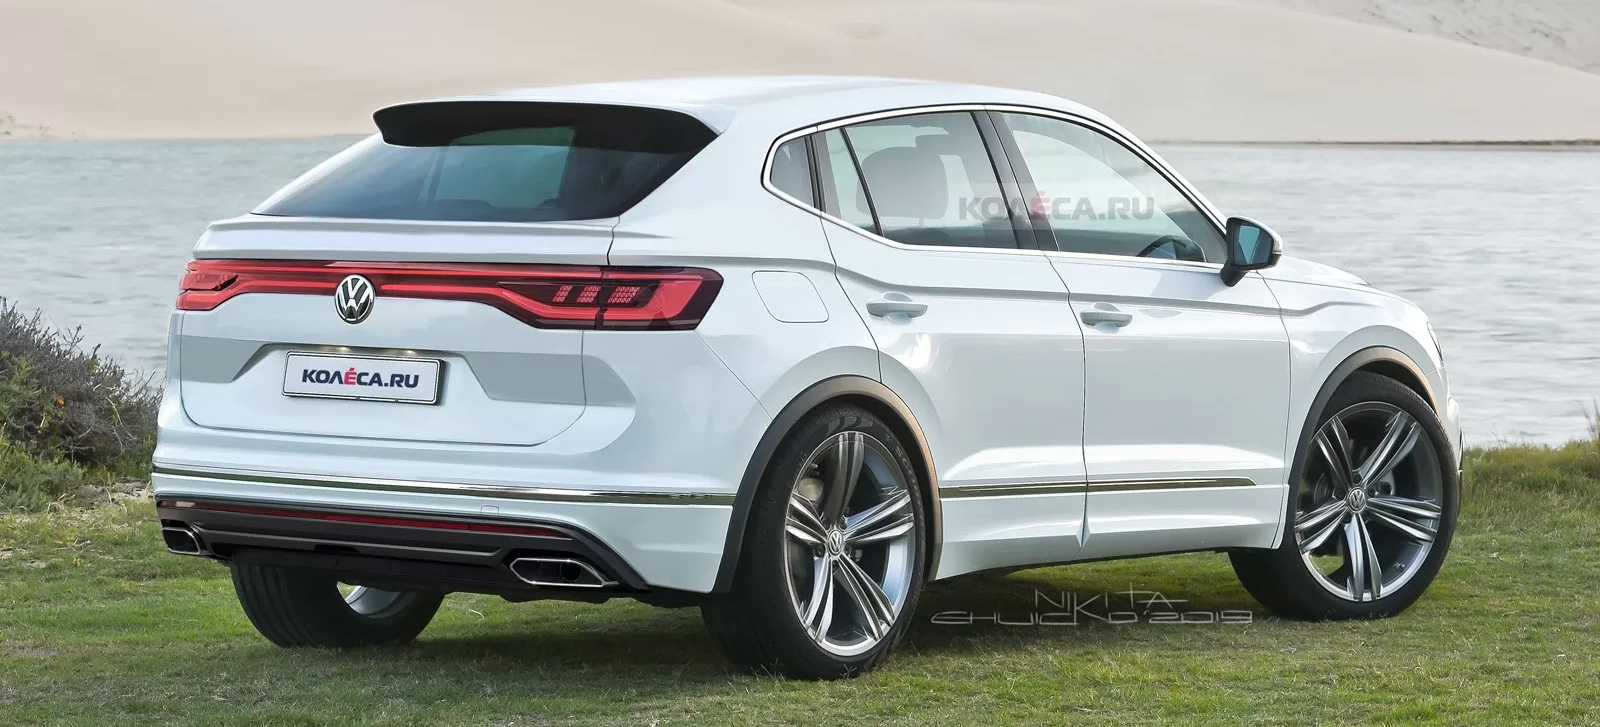 2022 VW Tiguan Imagined As A Crossover Coupe, Because Why Not?